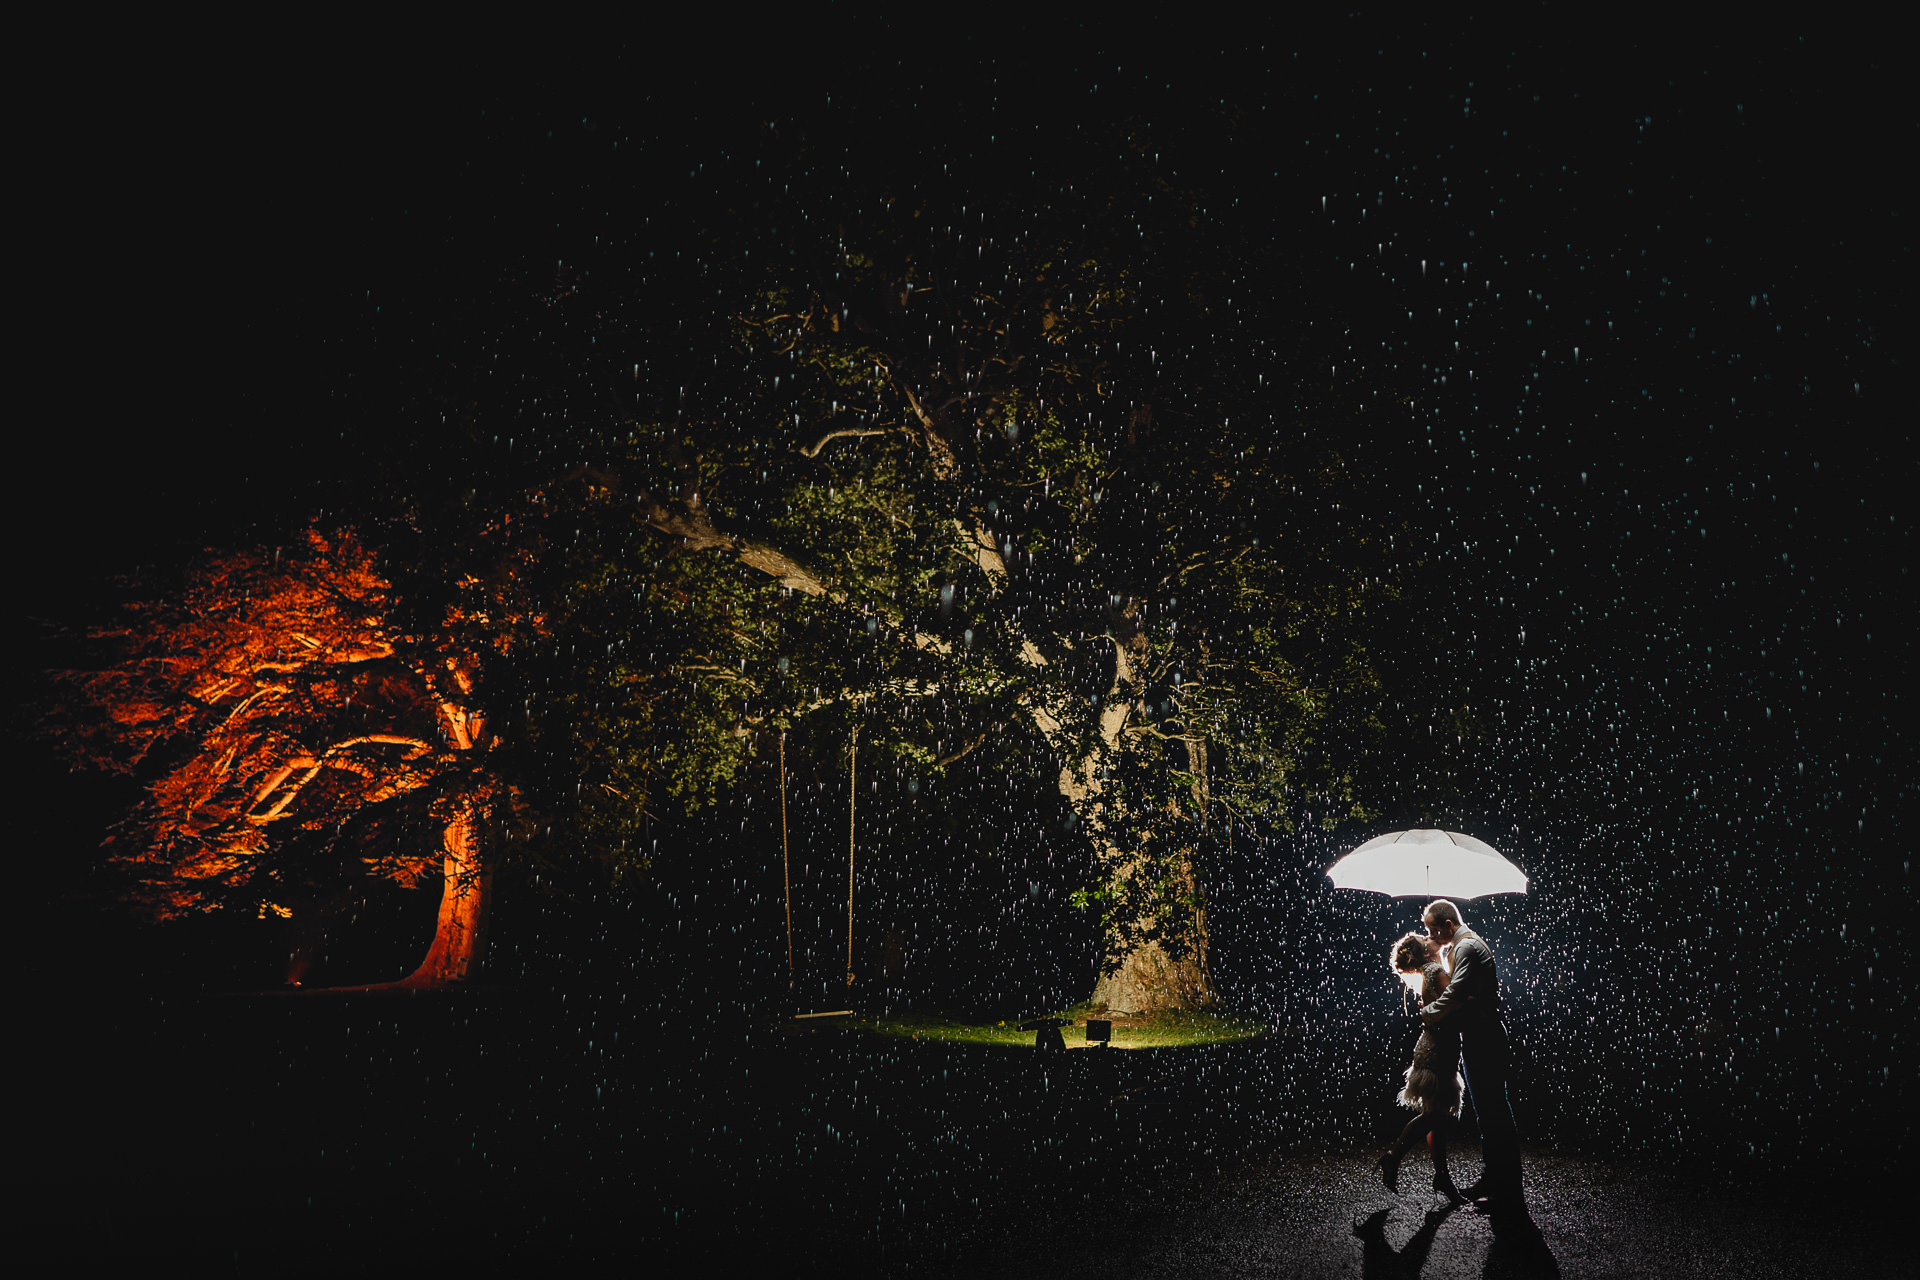 Bride and groom kissing underneath a lit umbrella in the rain with trees behind